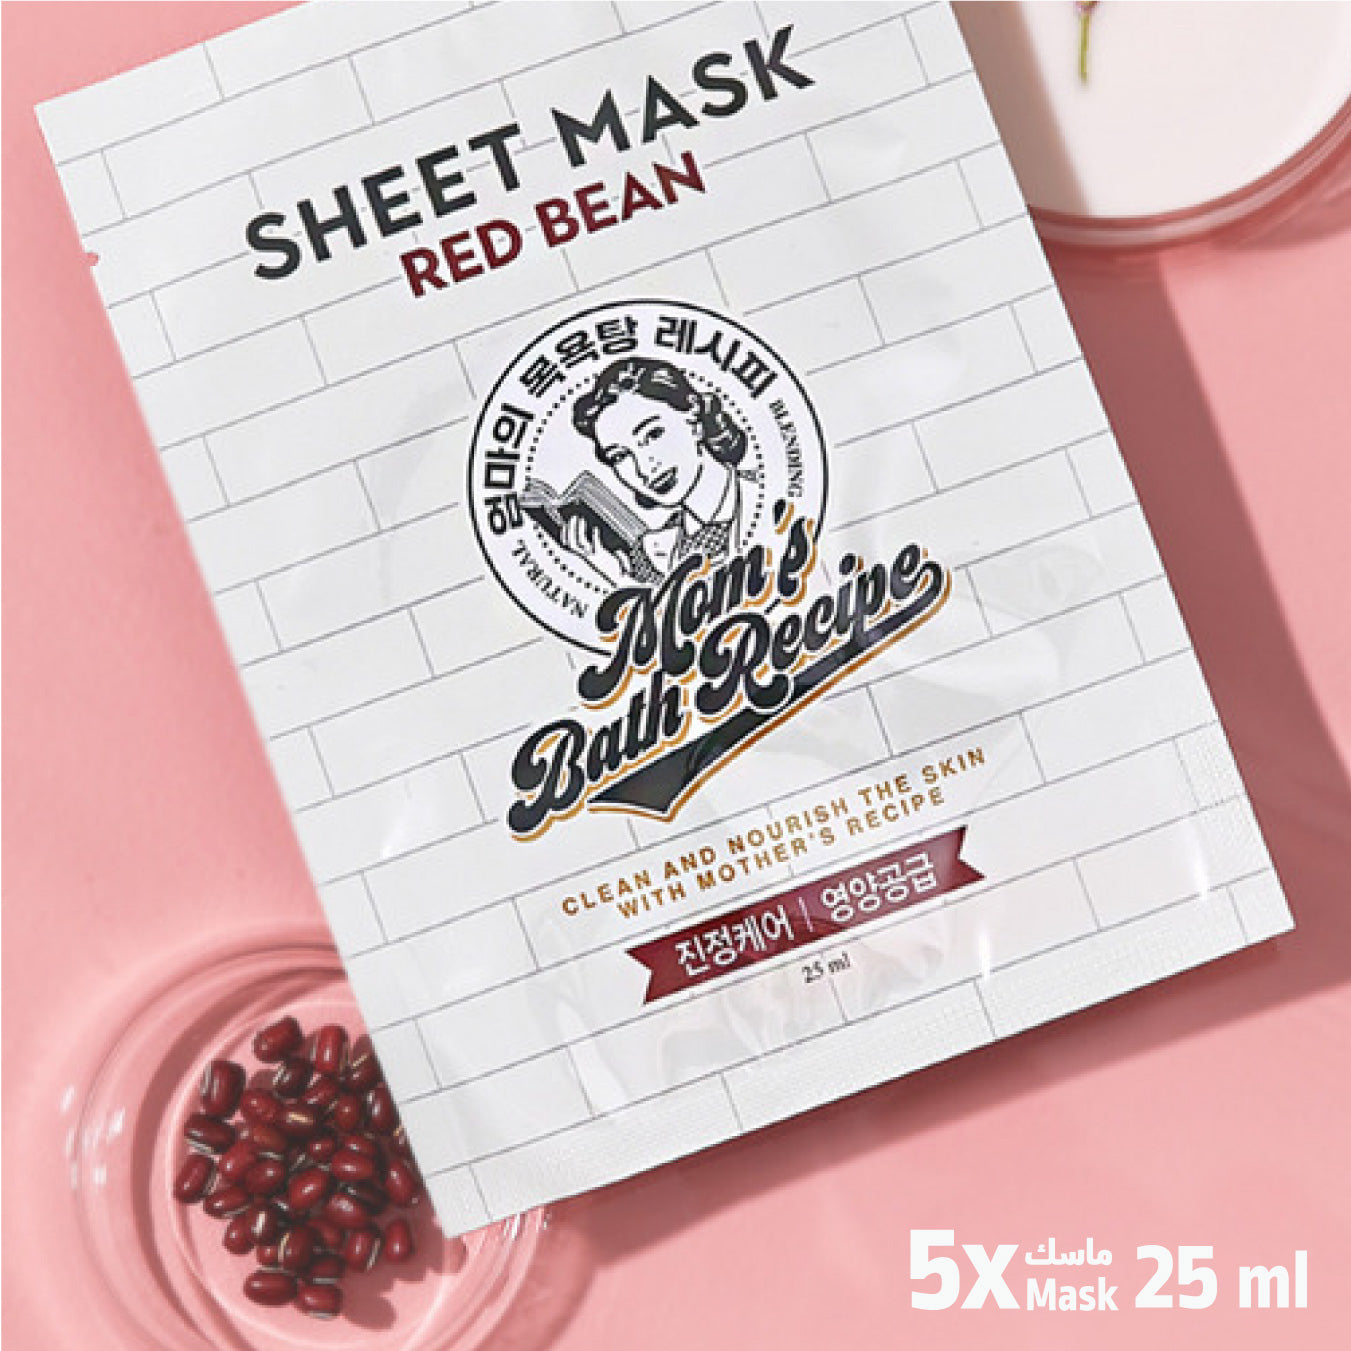 Moms Bath Box 5 Red Bean Masks to moisturize the face